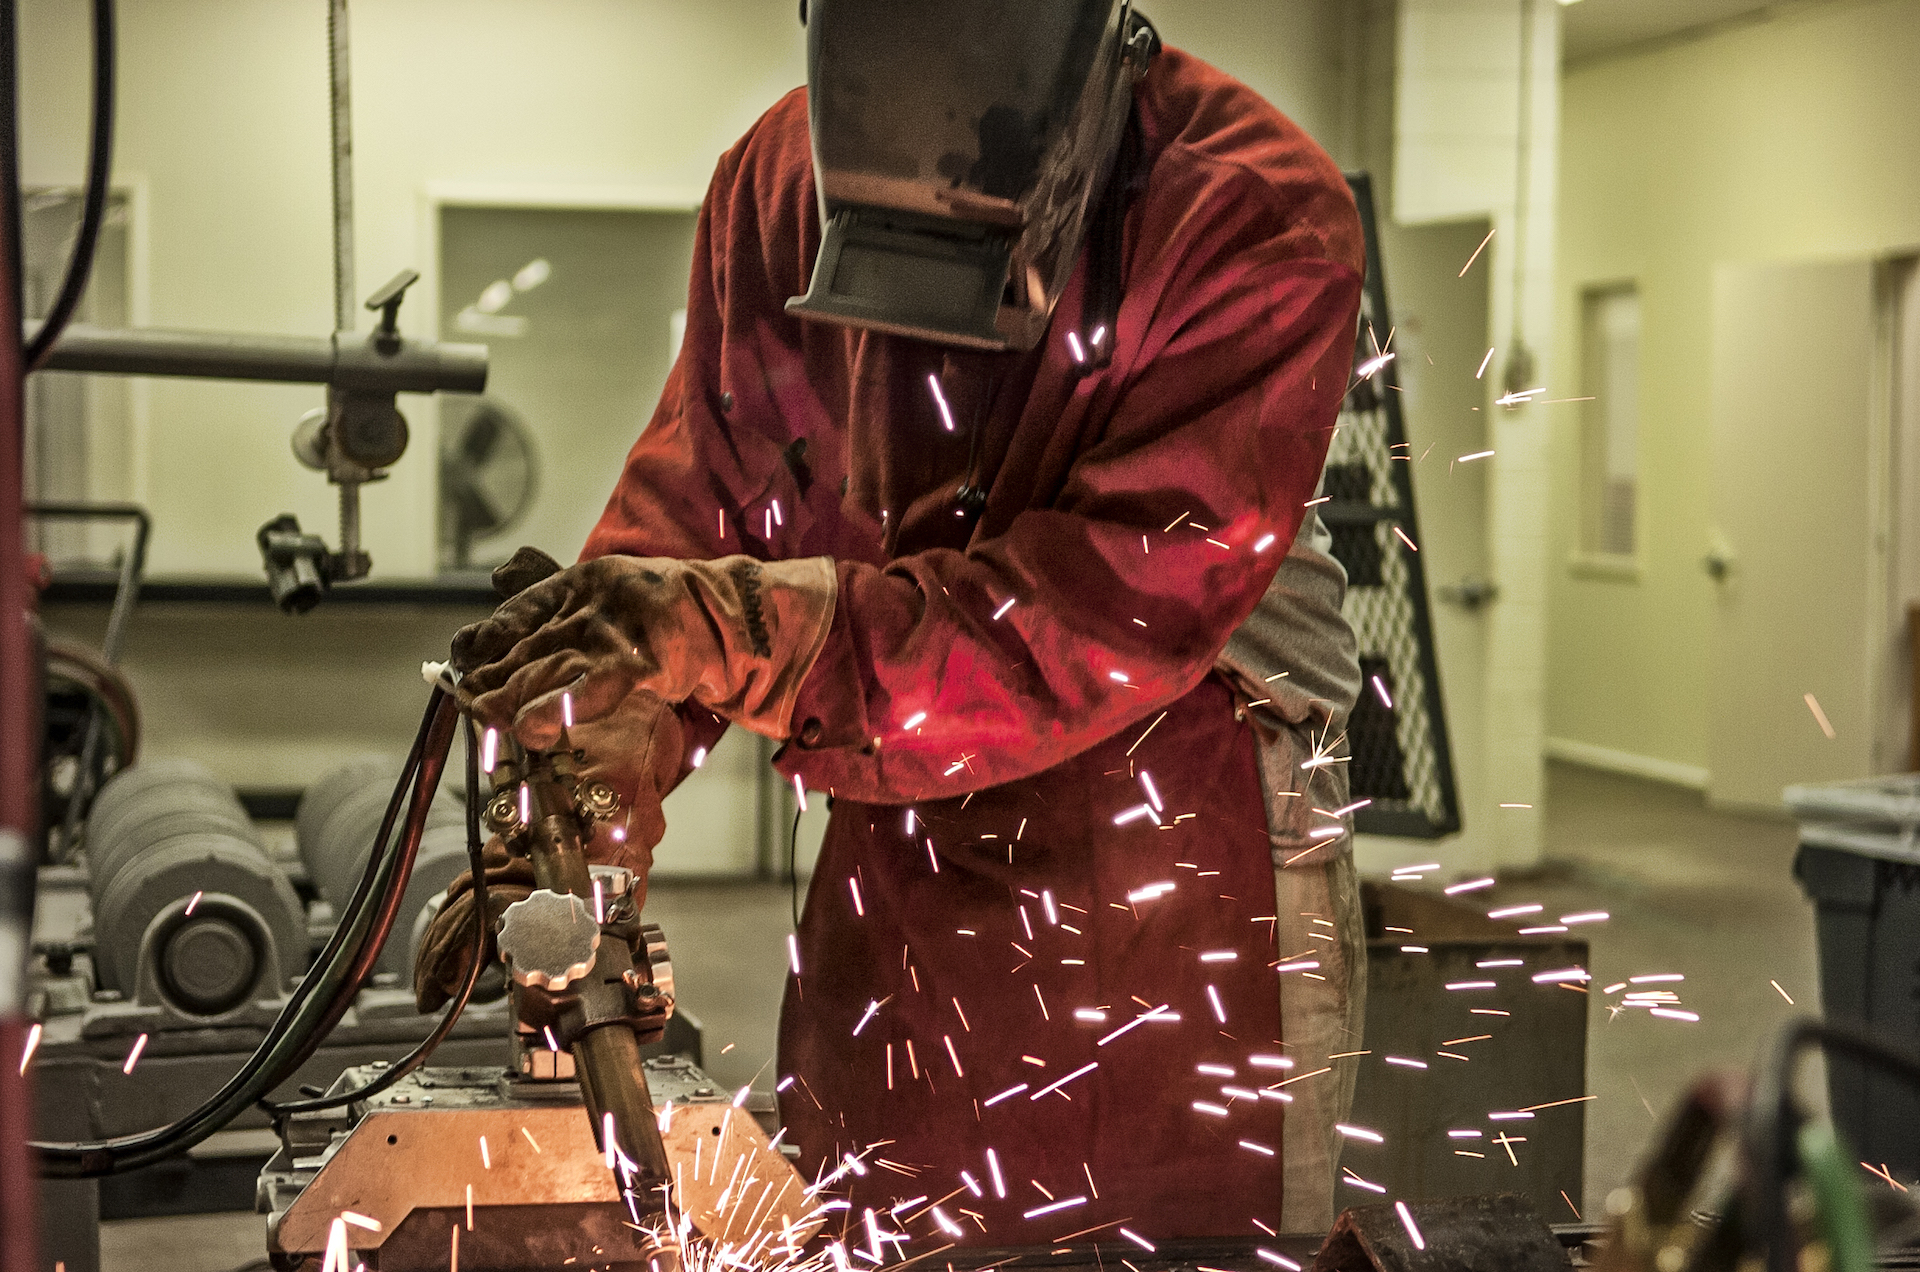 HCC trains the next generation of welders in high demand by diverse industries in the Greater Houston Area.